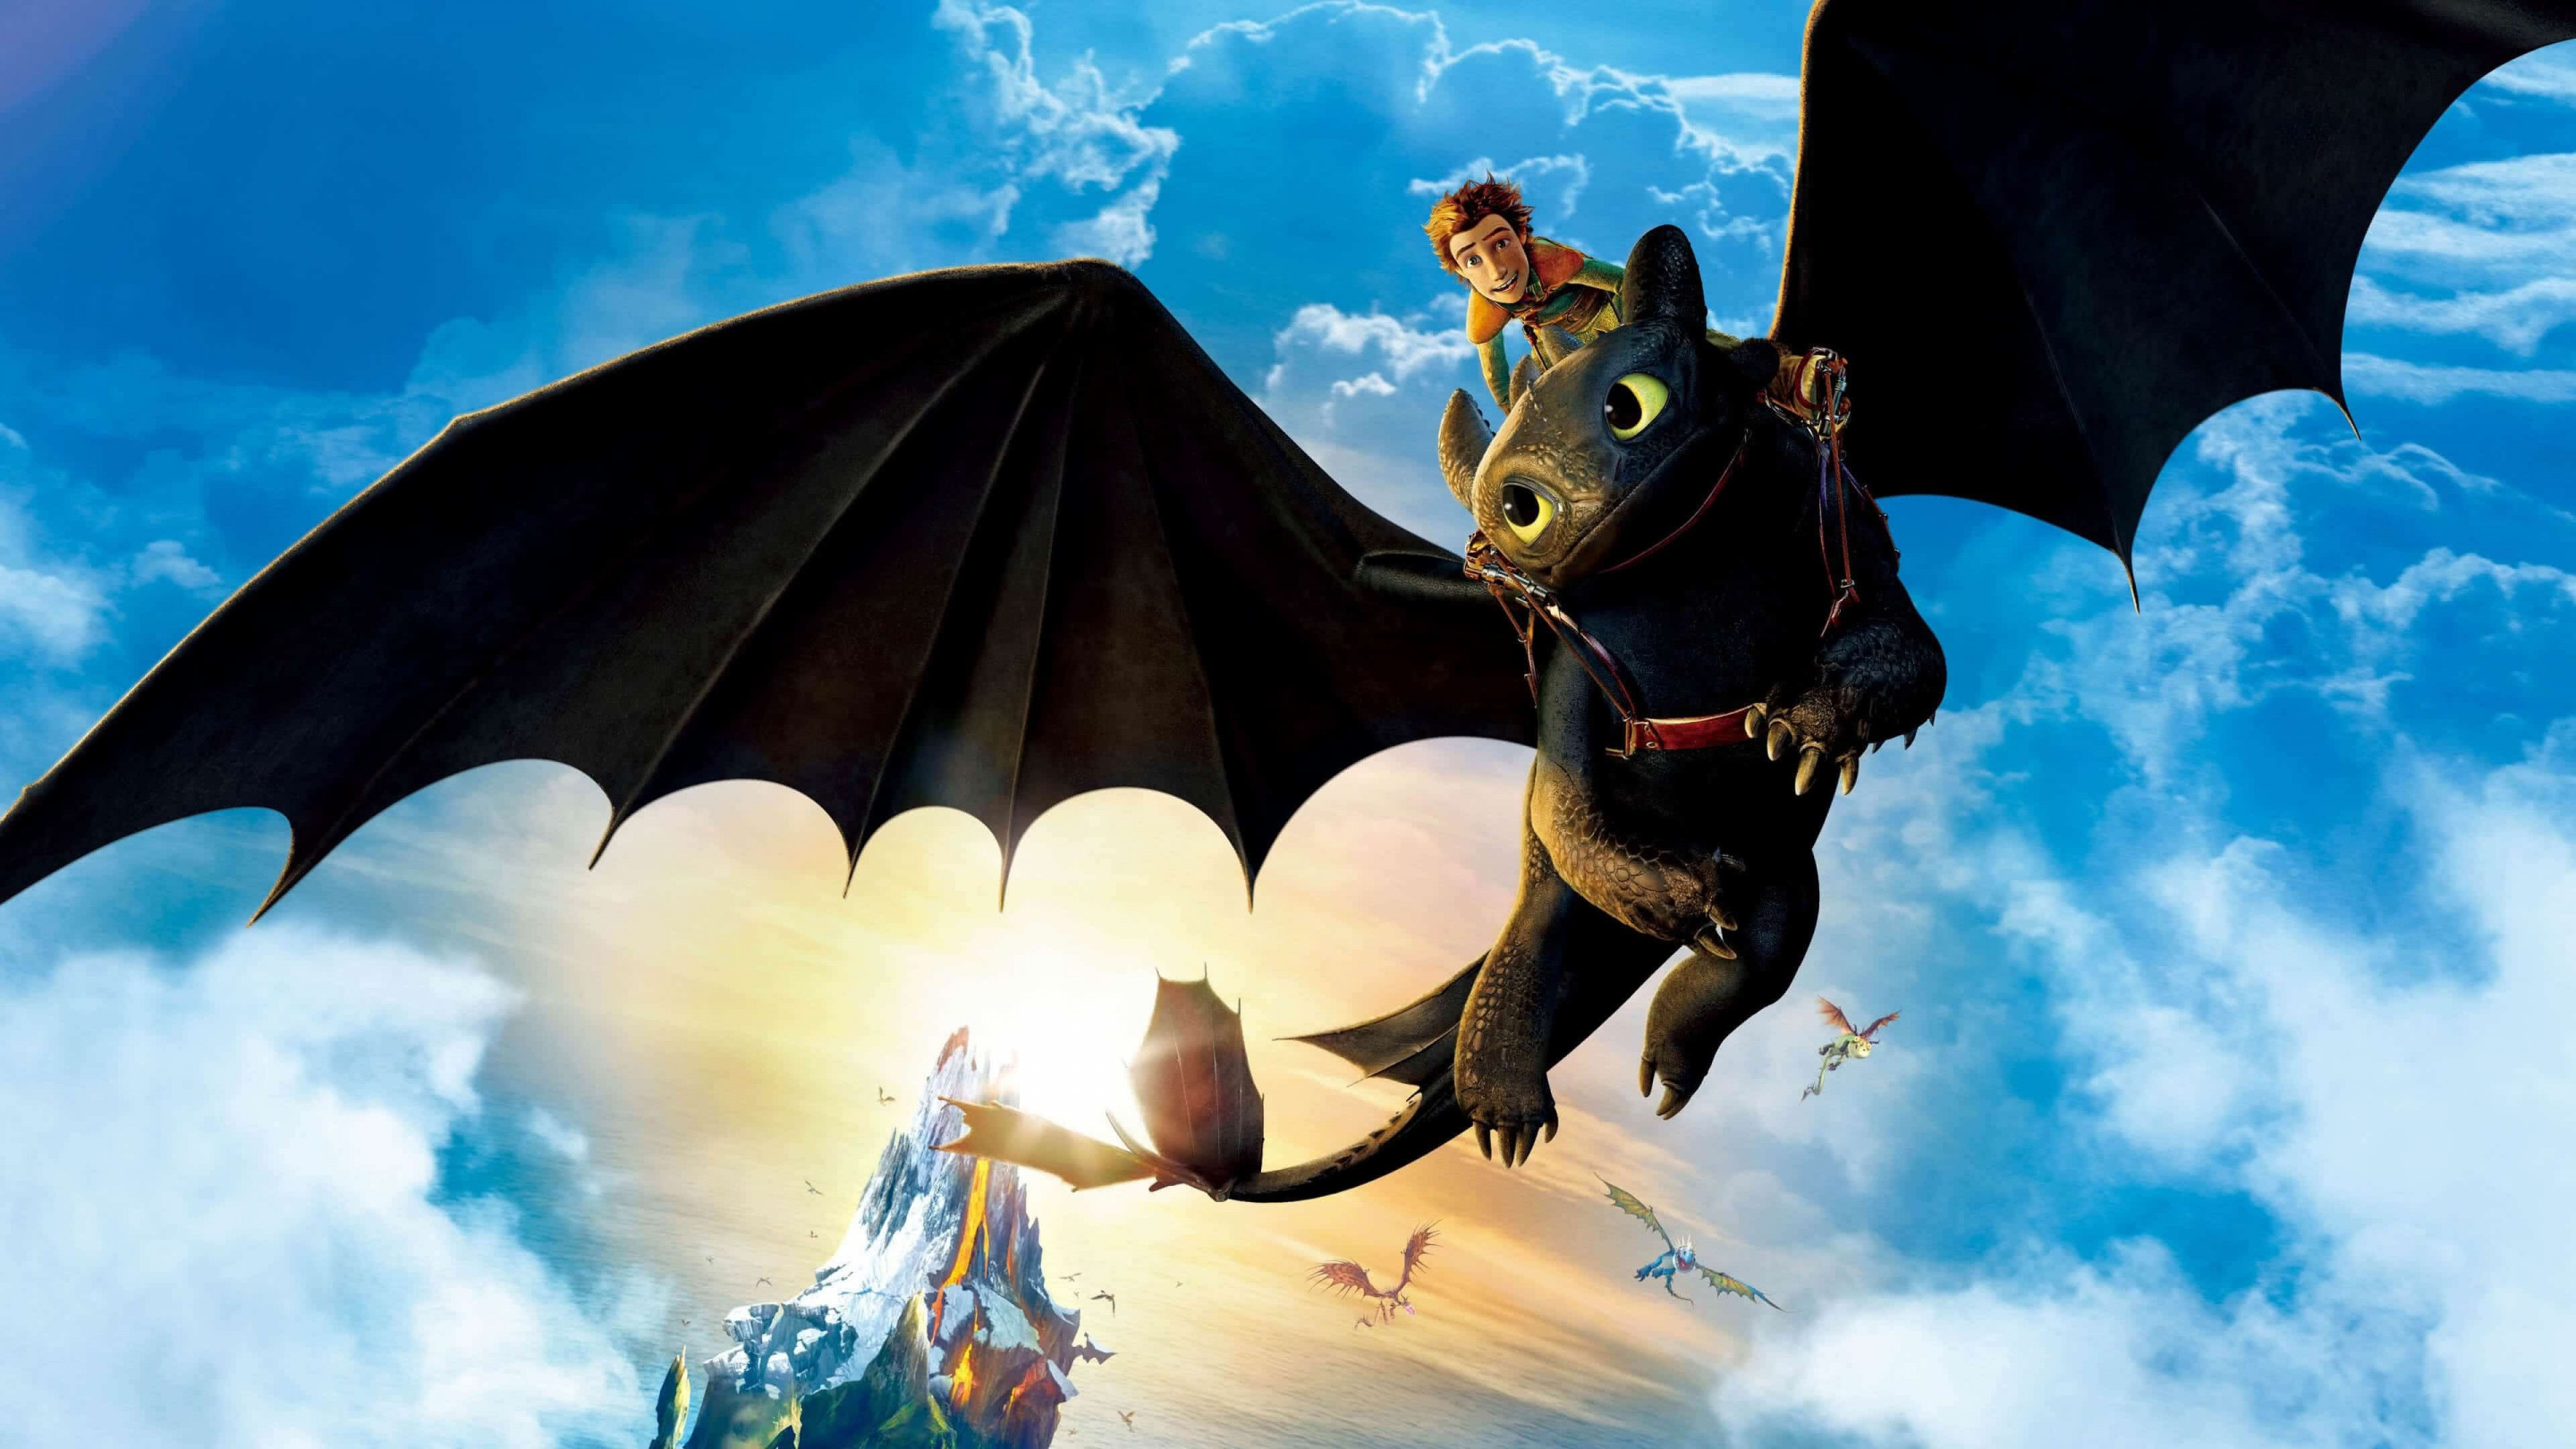 How to Train Your Dragon: The Hidden World wallpaper 2880x1620